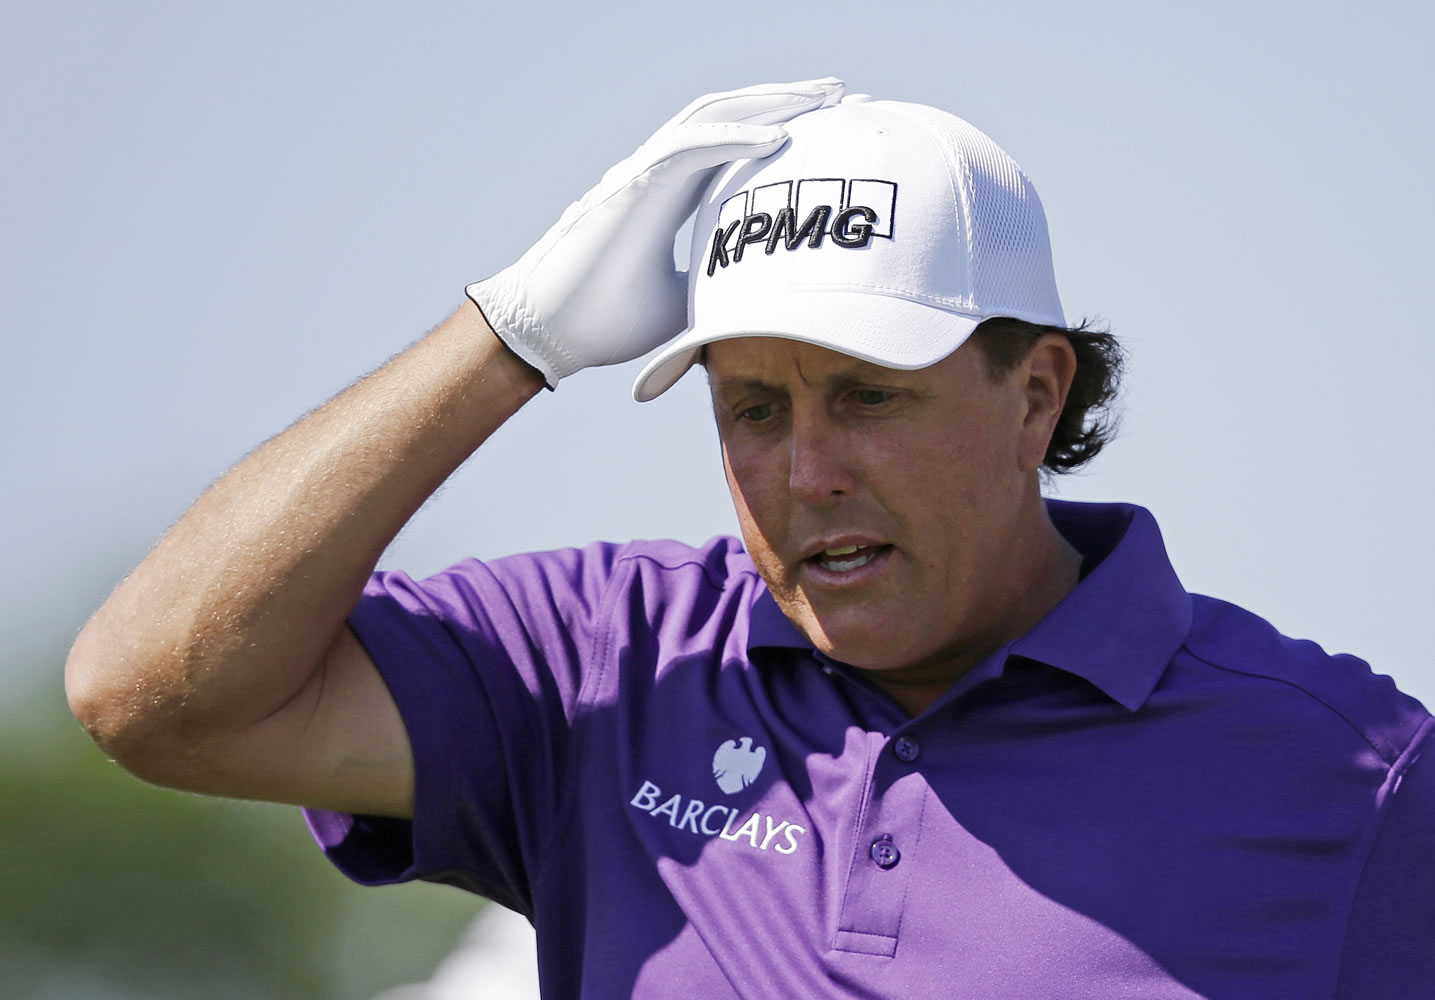 Phil Mickelson adjust his hat as he walks off the first tee during the third round of the Memorial golf tournament Saturday in Dublin, Ohio.  Mickelson says he's co-operating in an insider trading investigation involving him, investor Carl Icahn and Las Vegas gambler Billy Walters but maintains he did nothing wrong.